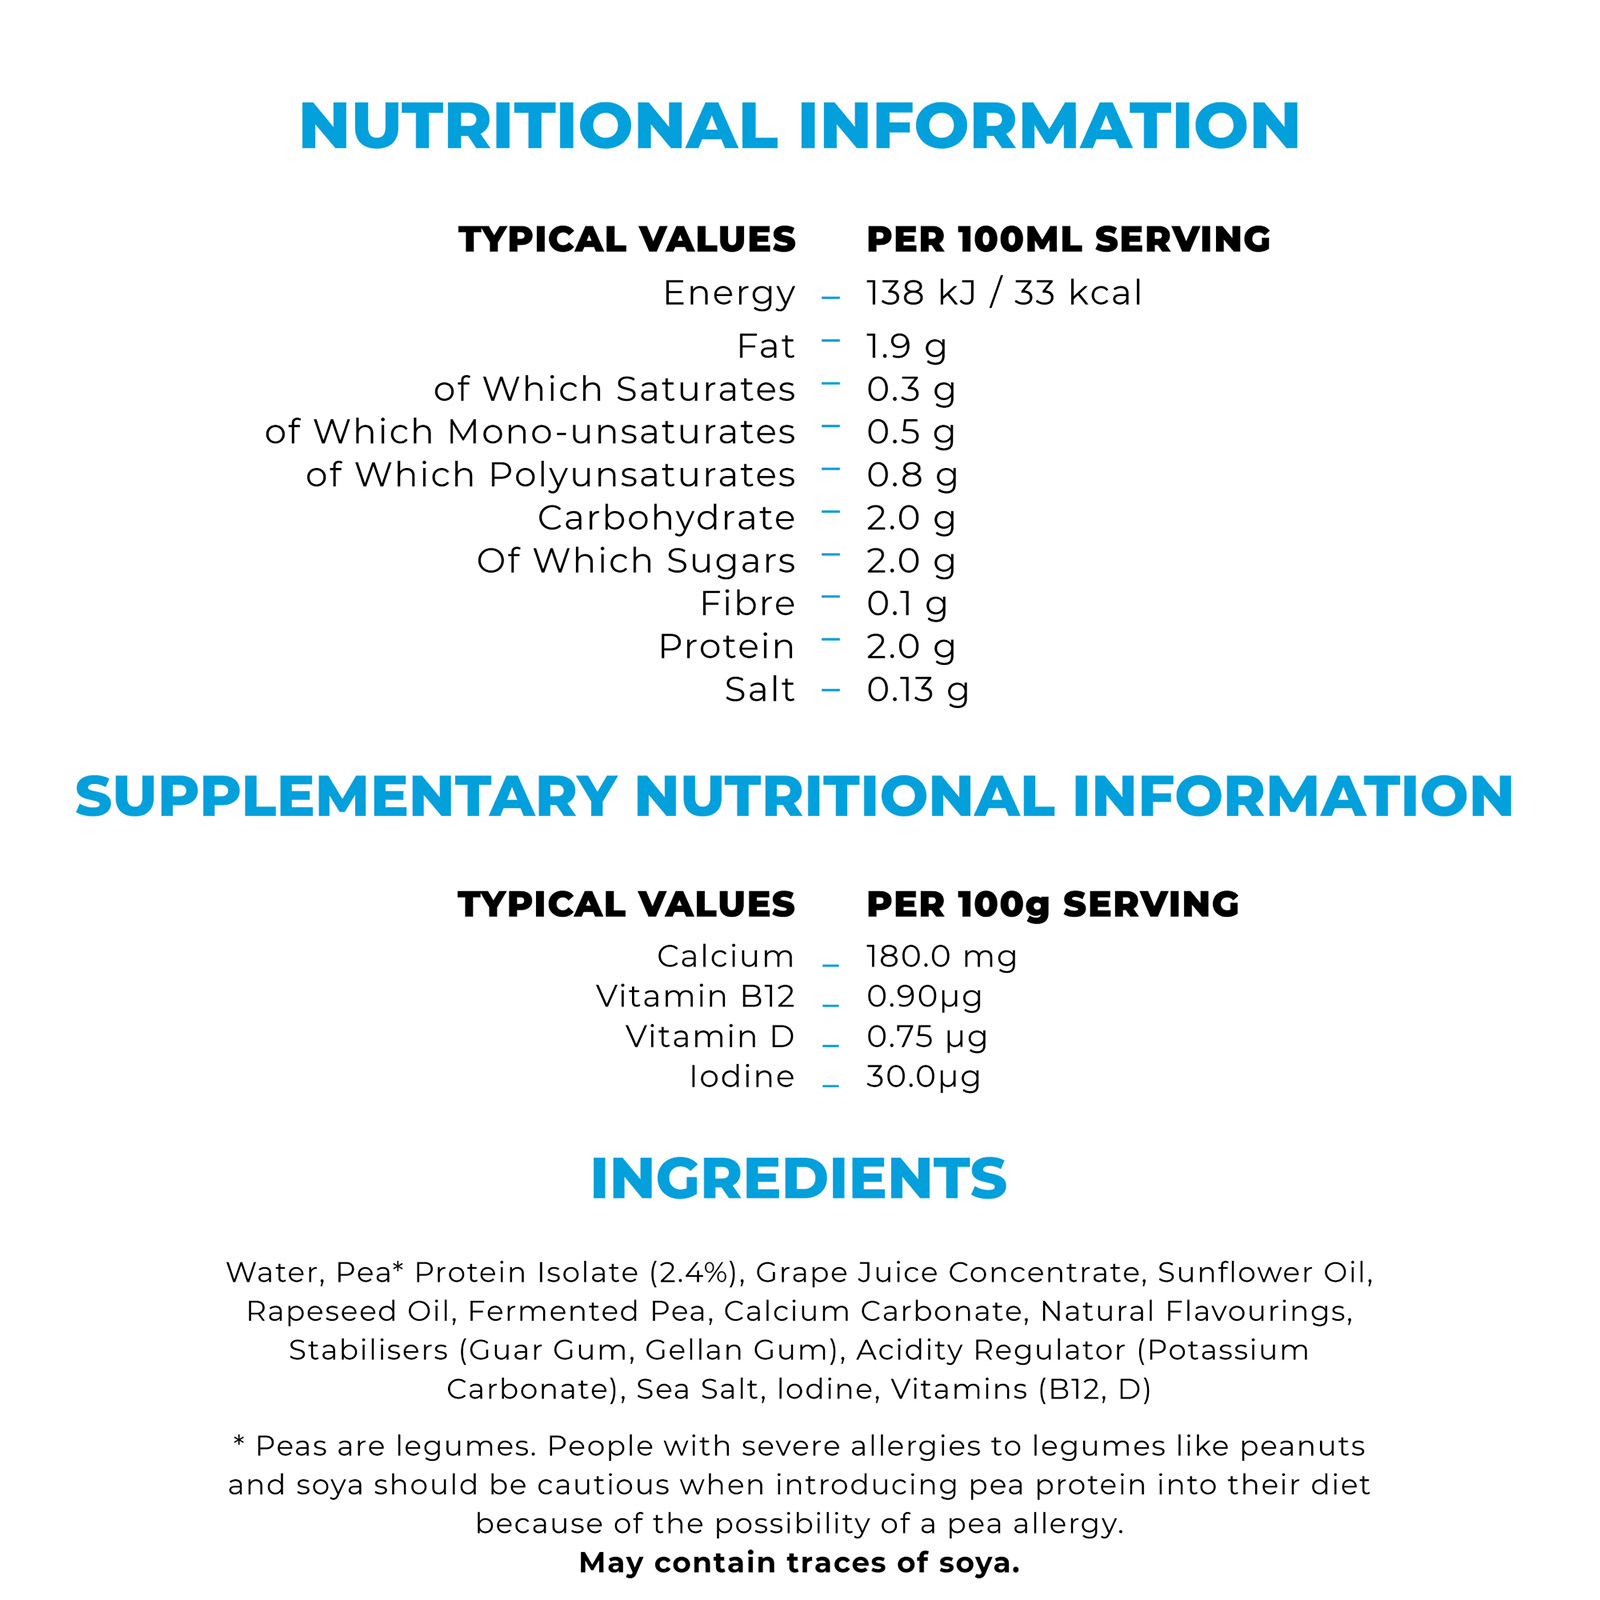 NUTRITIONAL INFORMATION
                          TYPICAL VALUES
                          Energy
                          Fat
                          of Which Saturates
                          of Which Mono-unsaturates
                          of Which Polyunsaturates
                          Of Which Sugars
                          Fibre
                          Protein
                          Salt
                          -
                          0.8 g
                          Carbohydrate - 2.0 g
                          2.0 g
                          0.1 g
                          2.0 g
                          0.13 g
                          -
                          TYPICAL VALUES
                          Calcium
                          PER 100ML SERVING
                          138 kJ/33 kcal
                          -
                          1.9 g
                          0.3 g
                          0.5 g
                          SUPPLEMENTARY NUTRITIONAL INFORMATION
                          PER 100g SERVING
                          180.0 mg
                          Vitamin B12
                          0.90μg
                          Vitamin D - 0.75 µg
                          lodine
                          30.0ug
                          INGREDIENTS
                          Water, Pea* Protein Isolate (2.4%), Grape Juice Concentrate, Sunflower Oil,
                          Rapeseed Oil, Fermented Pea, Calcium Carbonate, Natural Flavourings,
                          Stabilisers (Guar Gum, Gellan Gum), Acidity Regulator (Potassium
                          Carbonate), Sea Salt, lodine, Vitamins (B12, D)
                          Peas are legumes. People with severe allergies to legumes like peanuts
                          and soya should be cautious when introducing pea protein into their diet
                          because of the possibility of a pea allergy.
                          May contain traces of soya. 